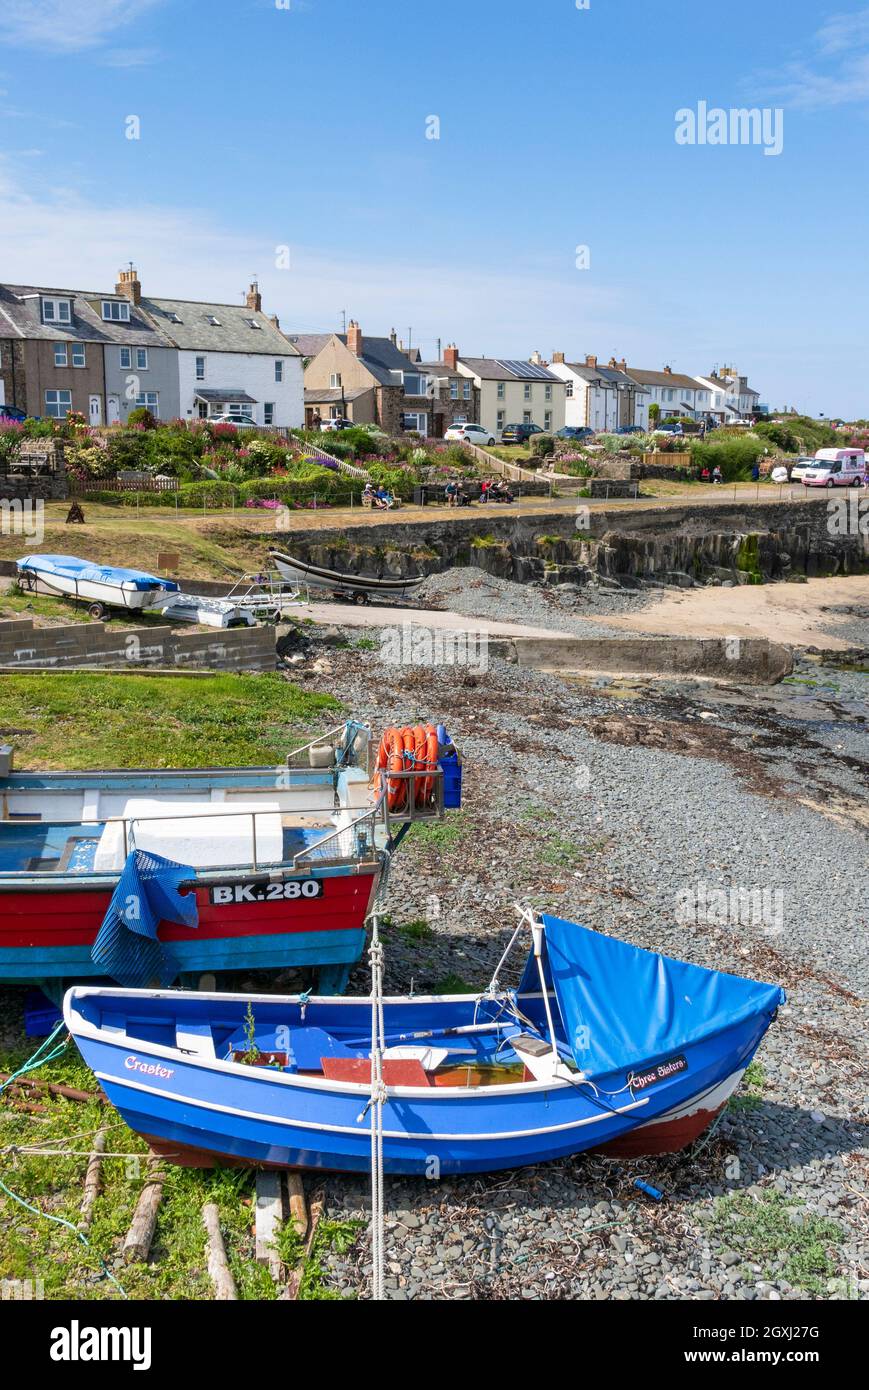 Fishing boats in the harbour in the coastal village of Craster Village Northumberland coast Northumbria Northumberland England GB UK Europe Stock Photo